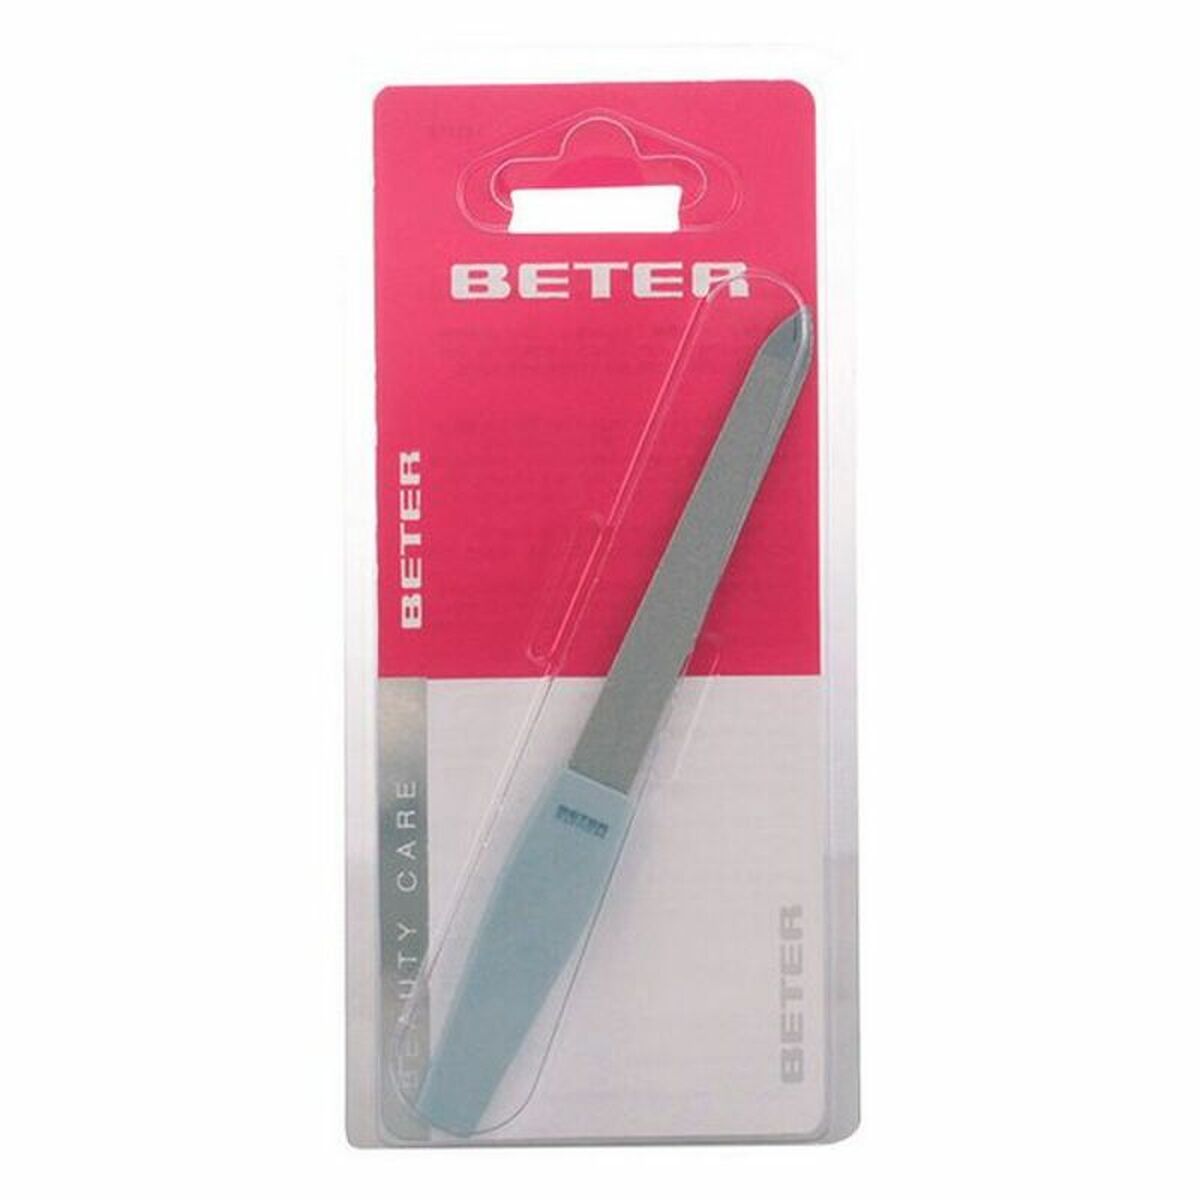 Nail file Beter Lima - Calm Beauty IE